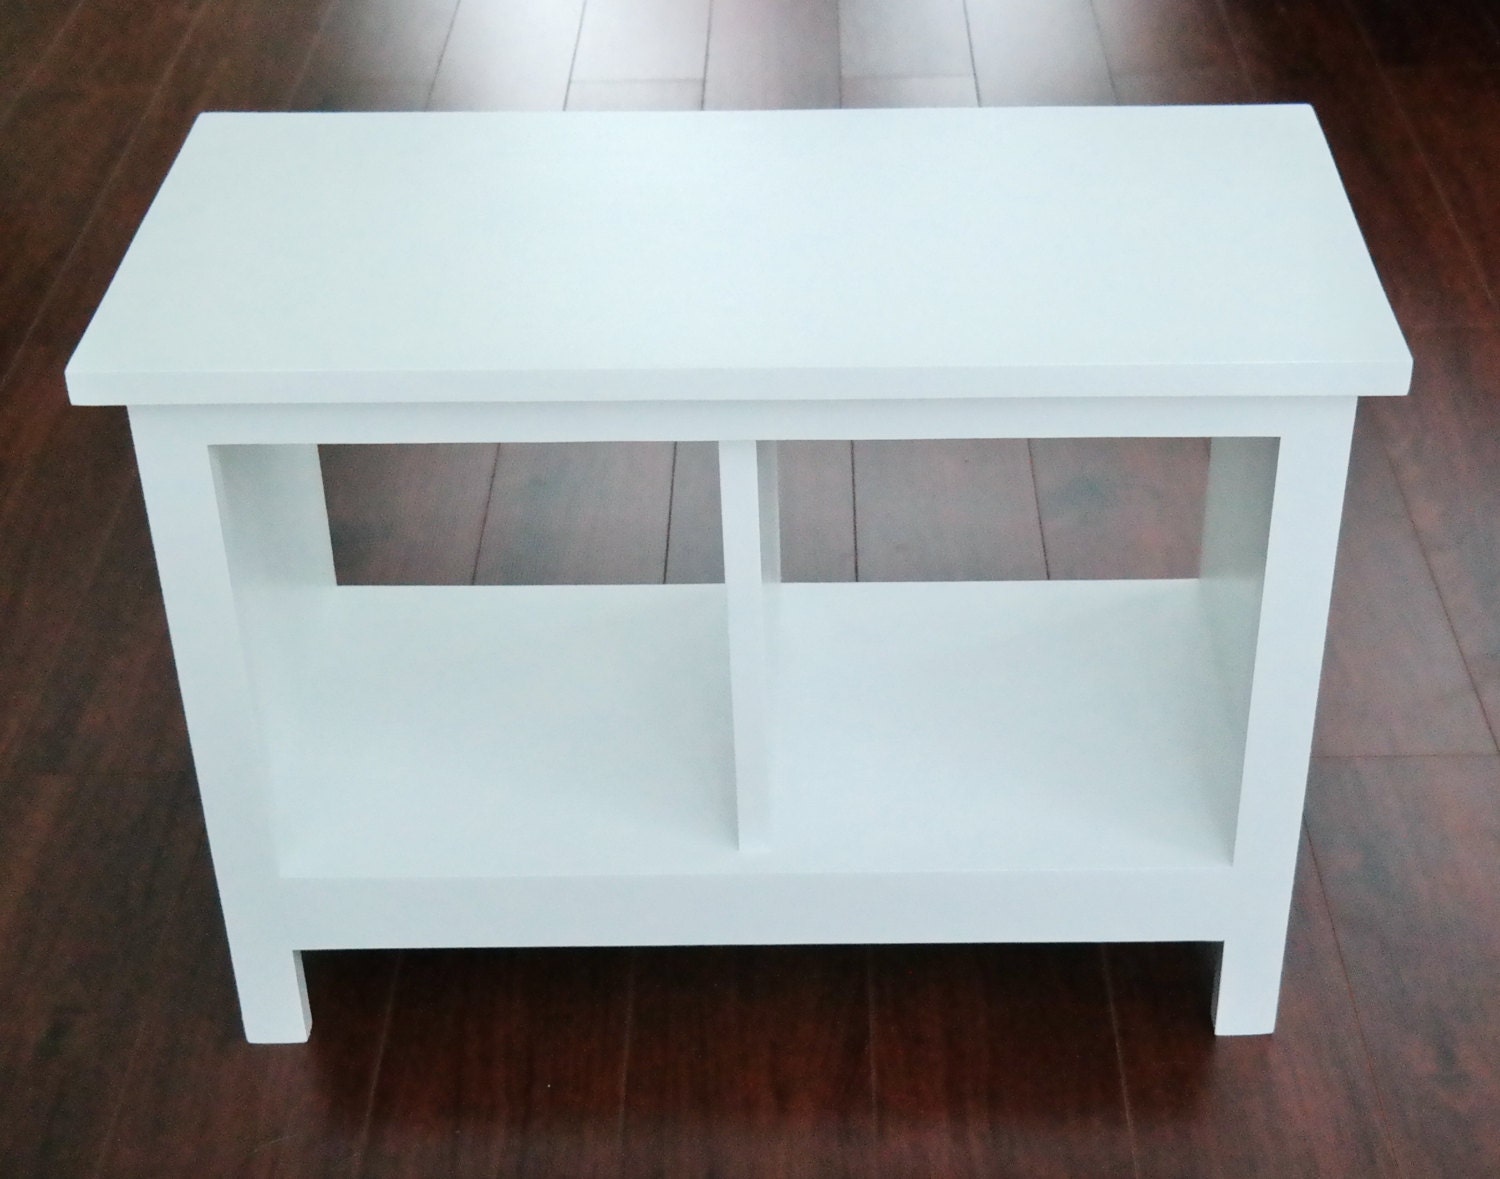 ON SALE 24 Inch Painted Entryway Bench Shoe Cubby Cubby